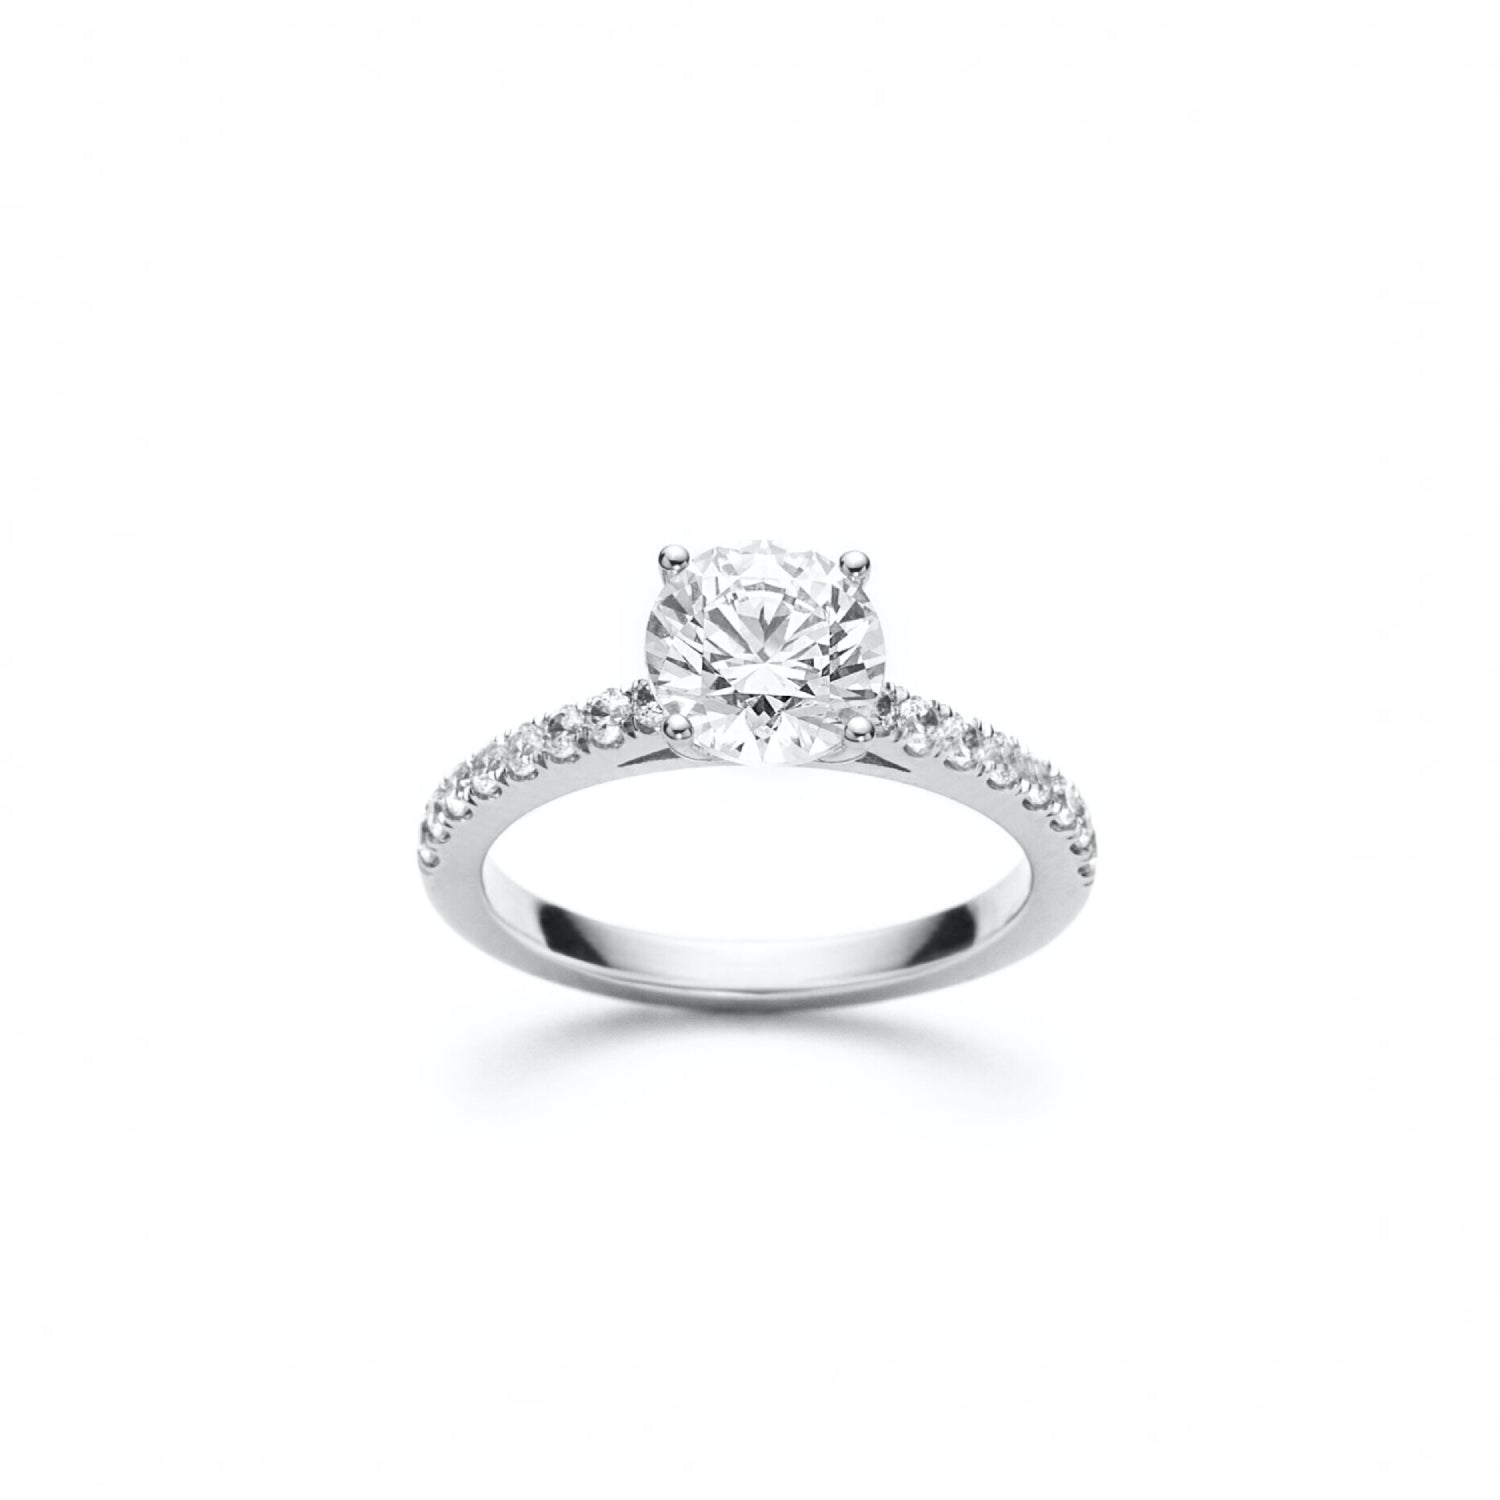 Round Brilliant Cut Diamond Solitaire Engagement Ring in White Gold